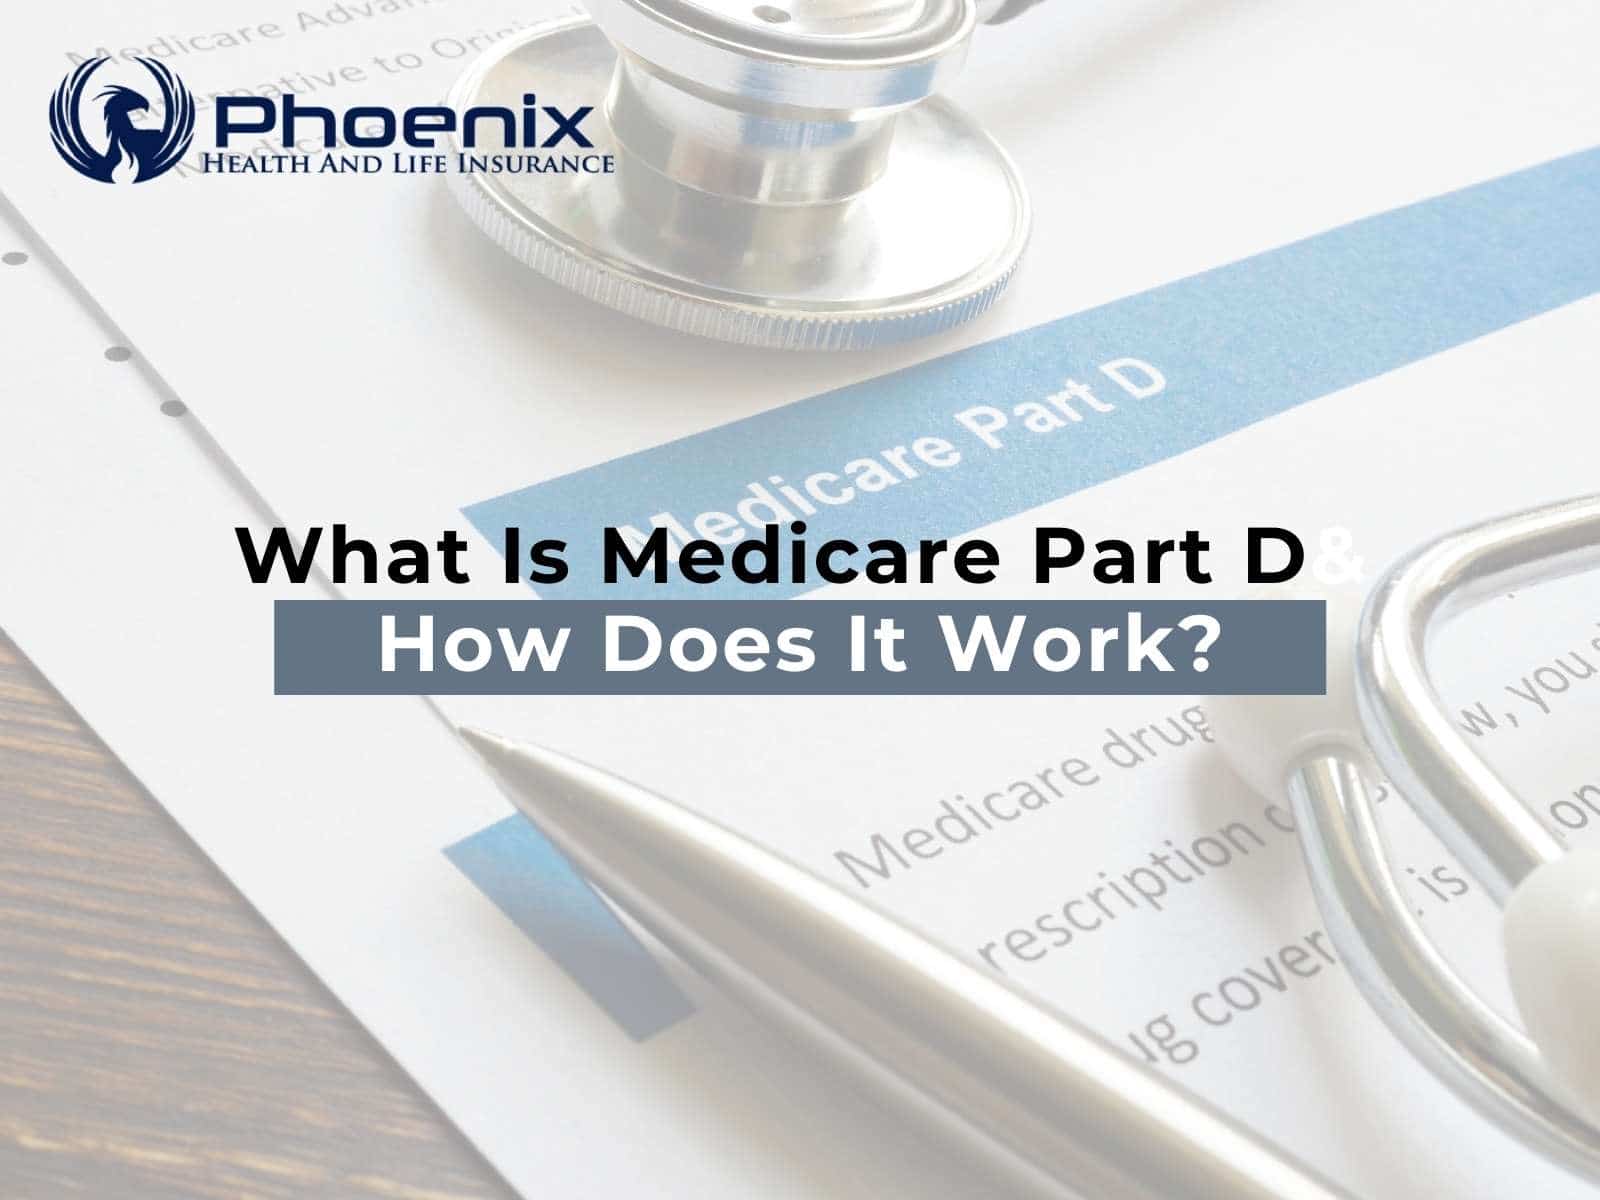 What Is Medicare Part D & How Does It Work?